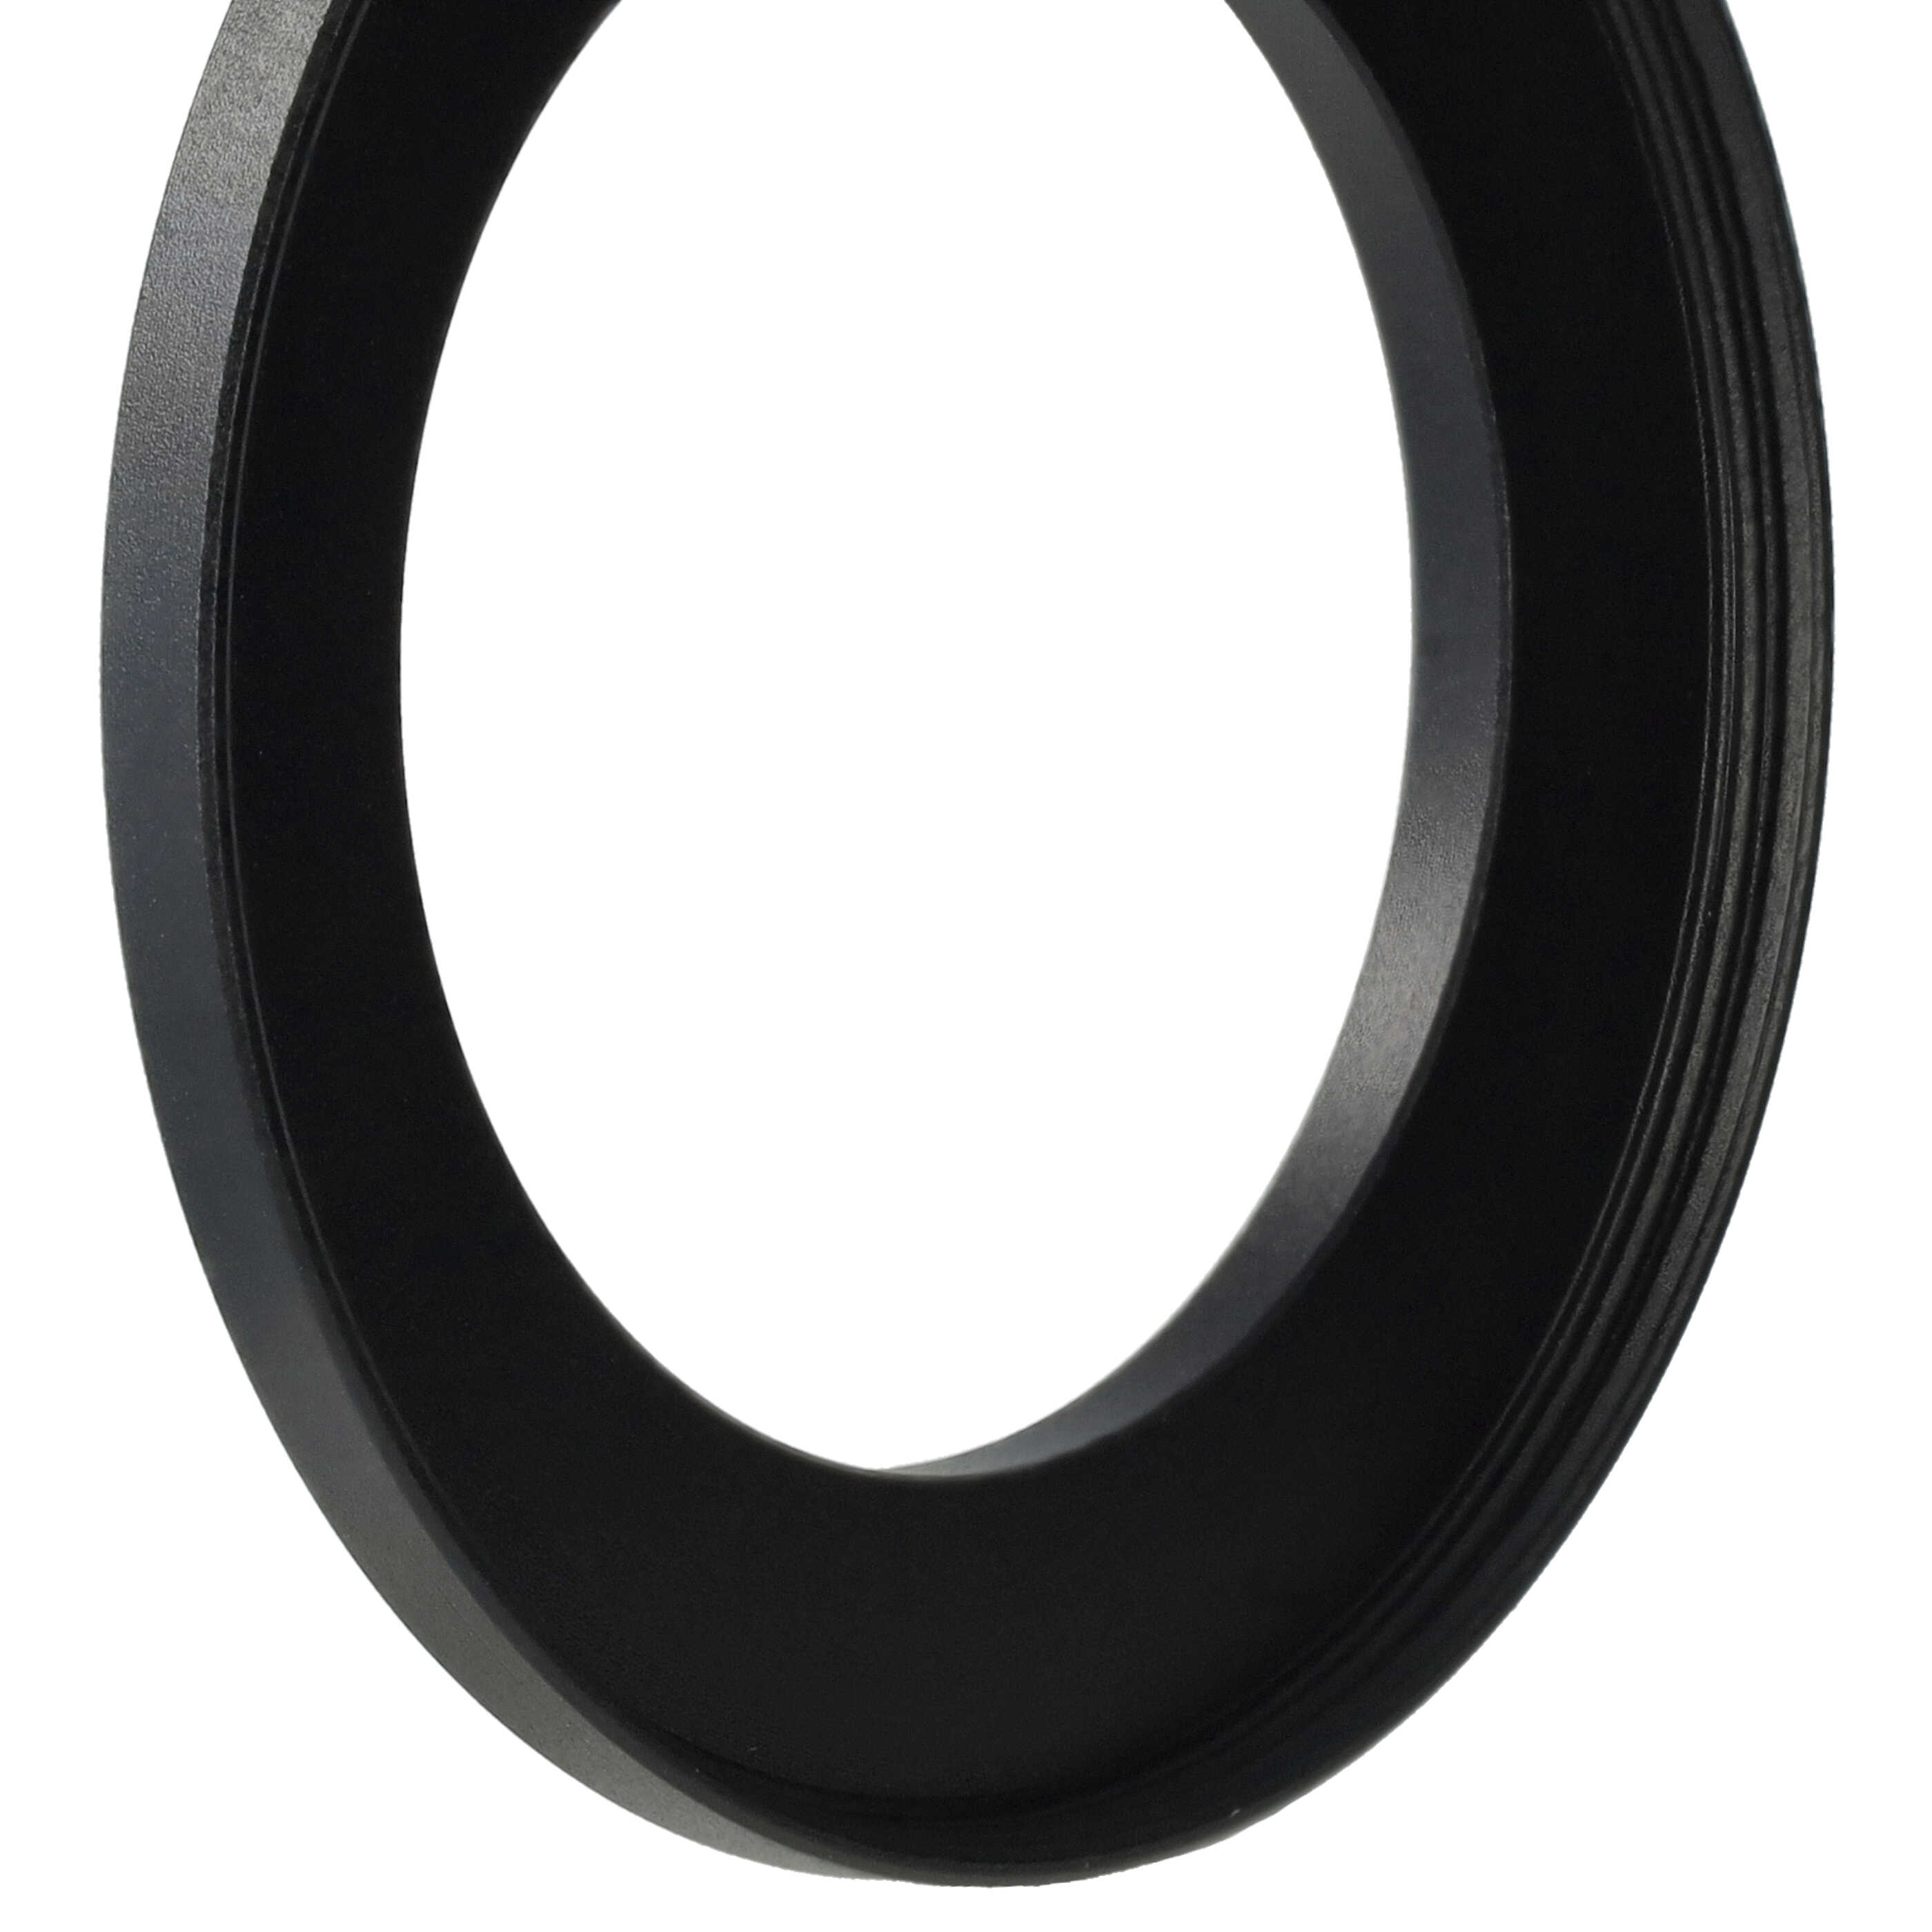 Step-Up Ring Adapter of 43 mm to 58 mmfor various Camera Lens - Filter Adapter